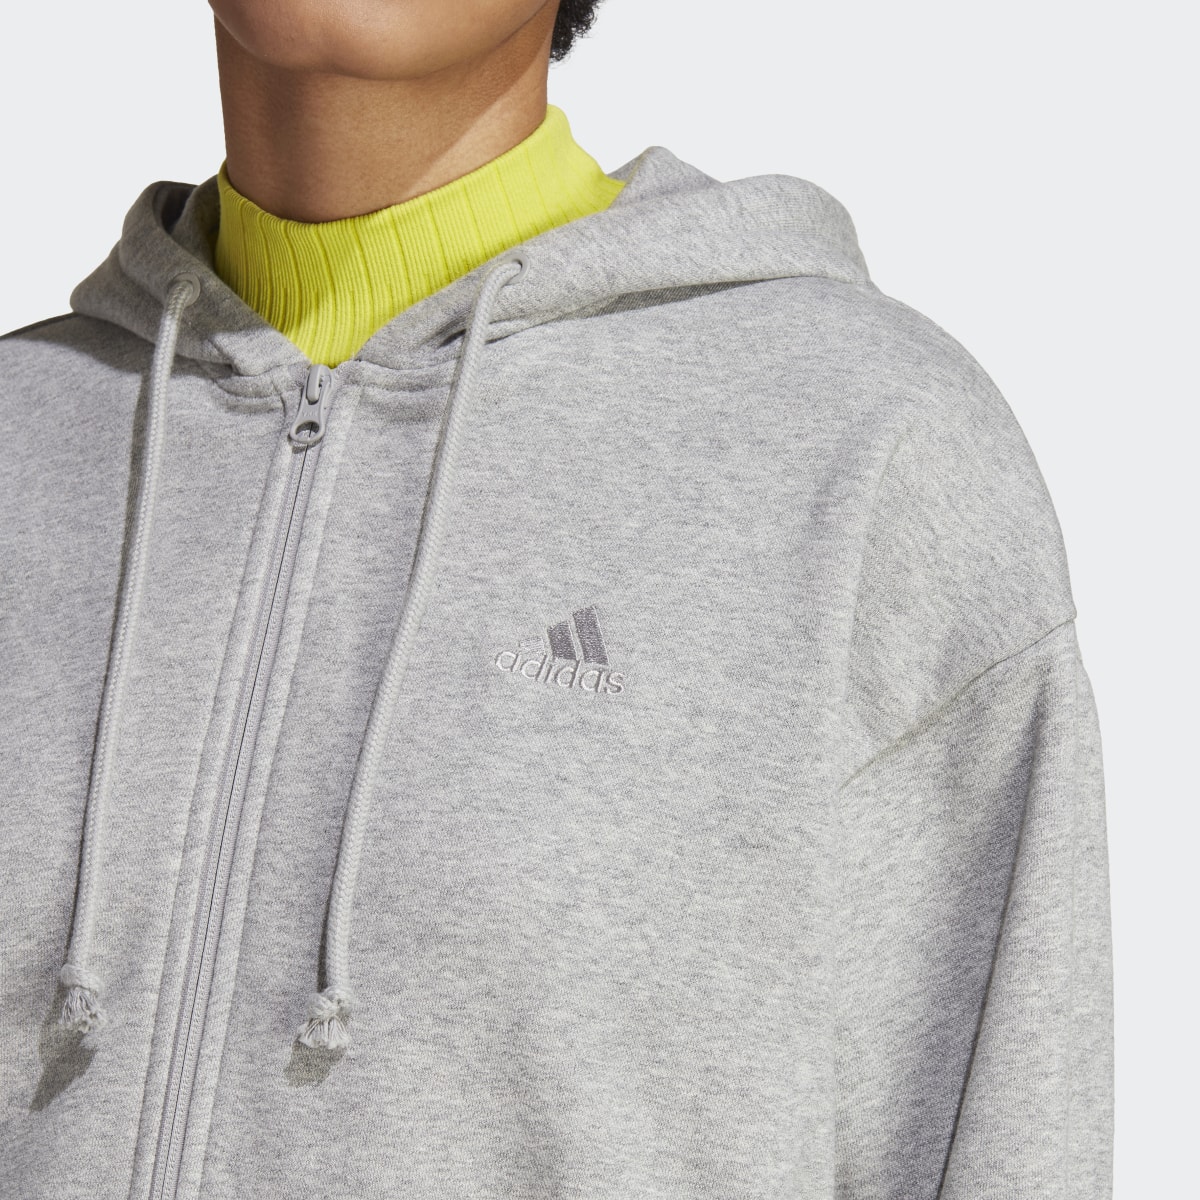 Adidas All SZN French Terry Oversized Full-Zip Hoodie. 6